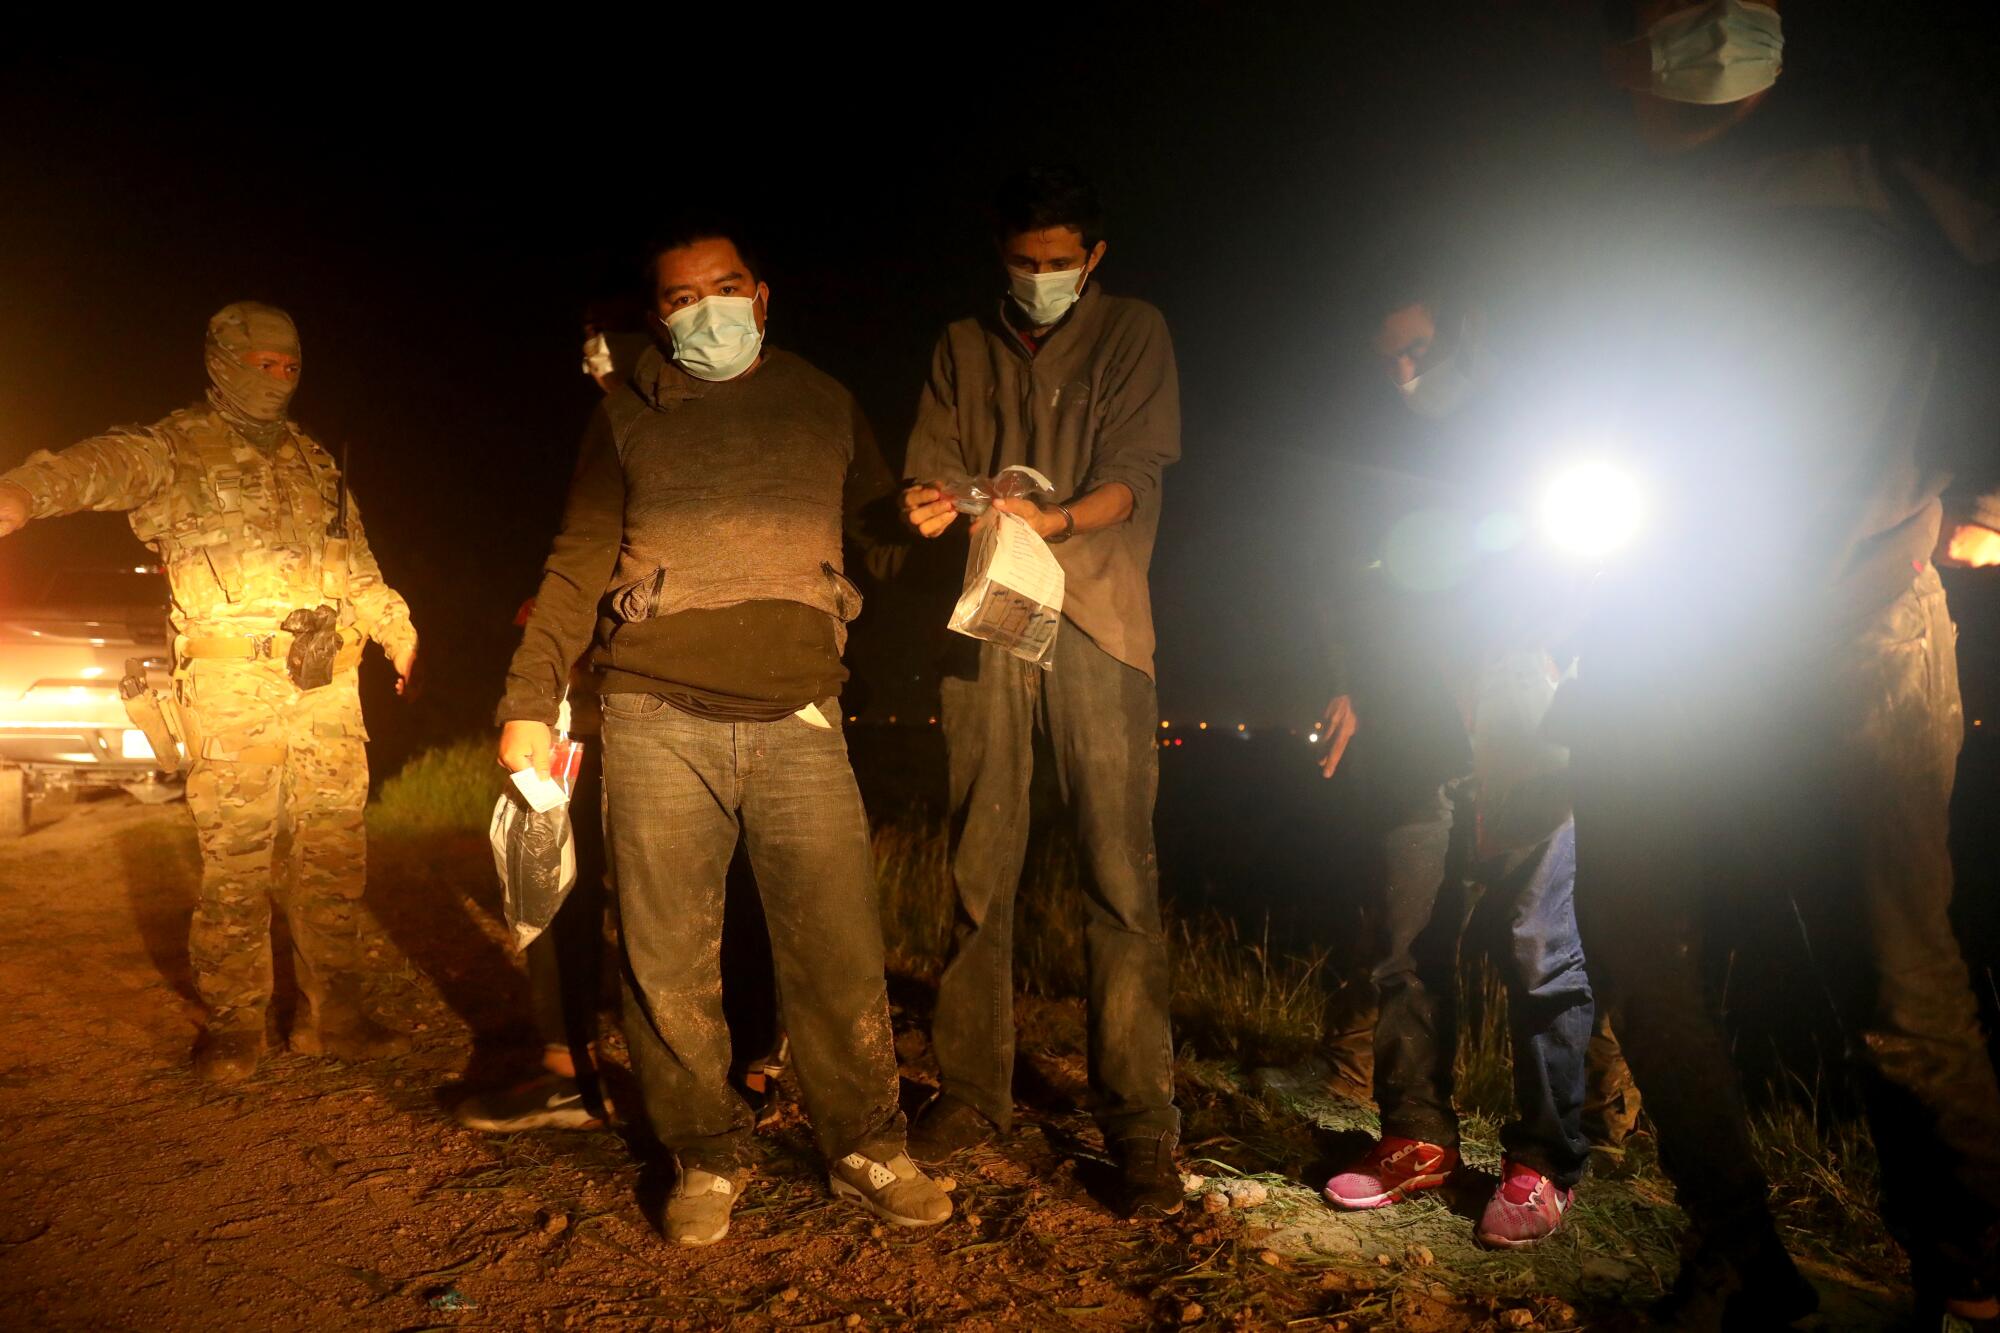 A group of migrants, one from Mexico and nine from Central America are caught by the U.S. Border Patrol.